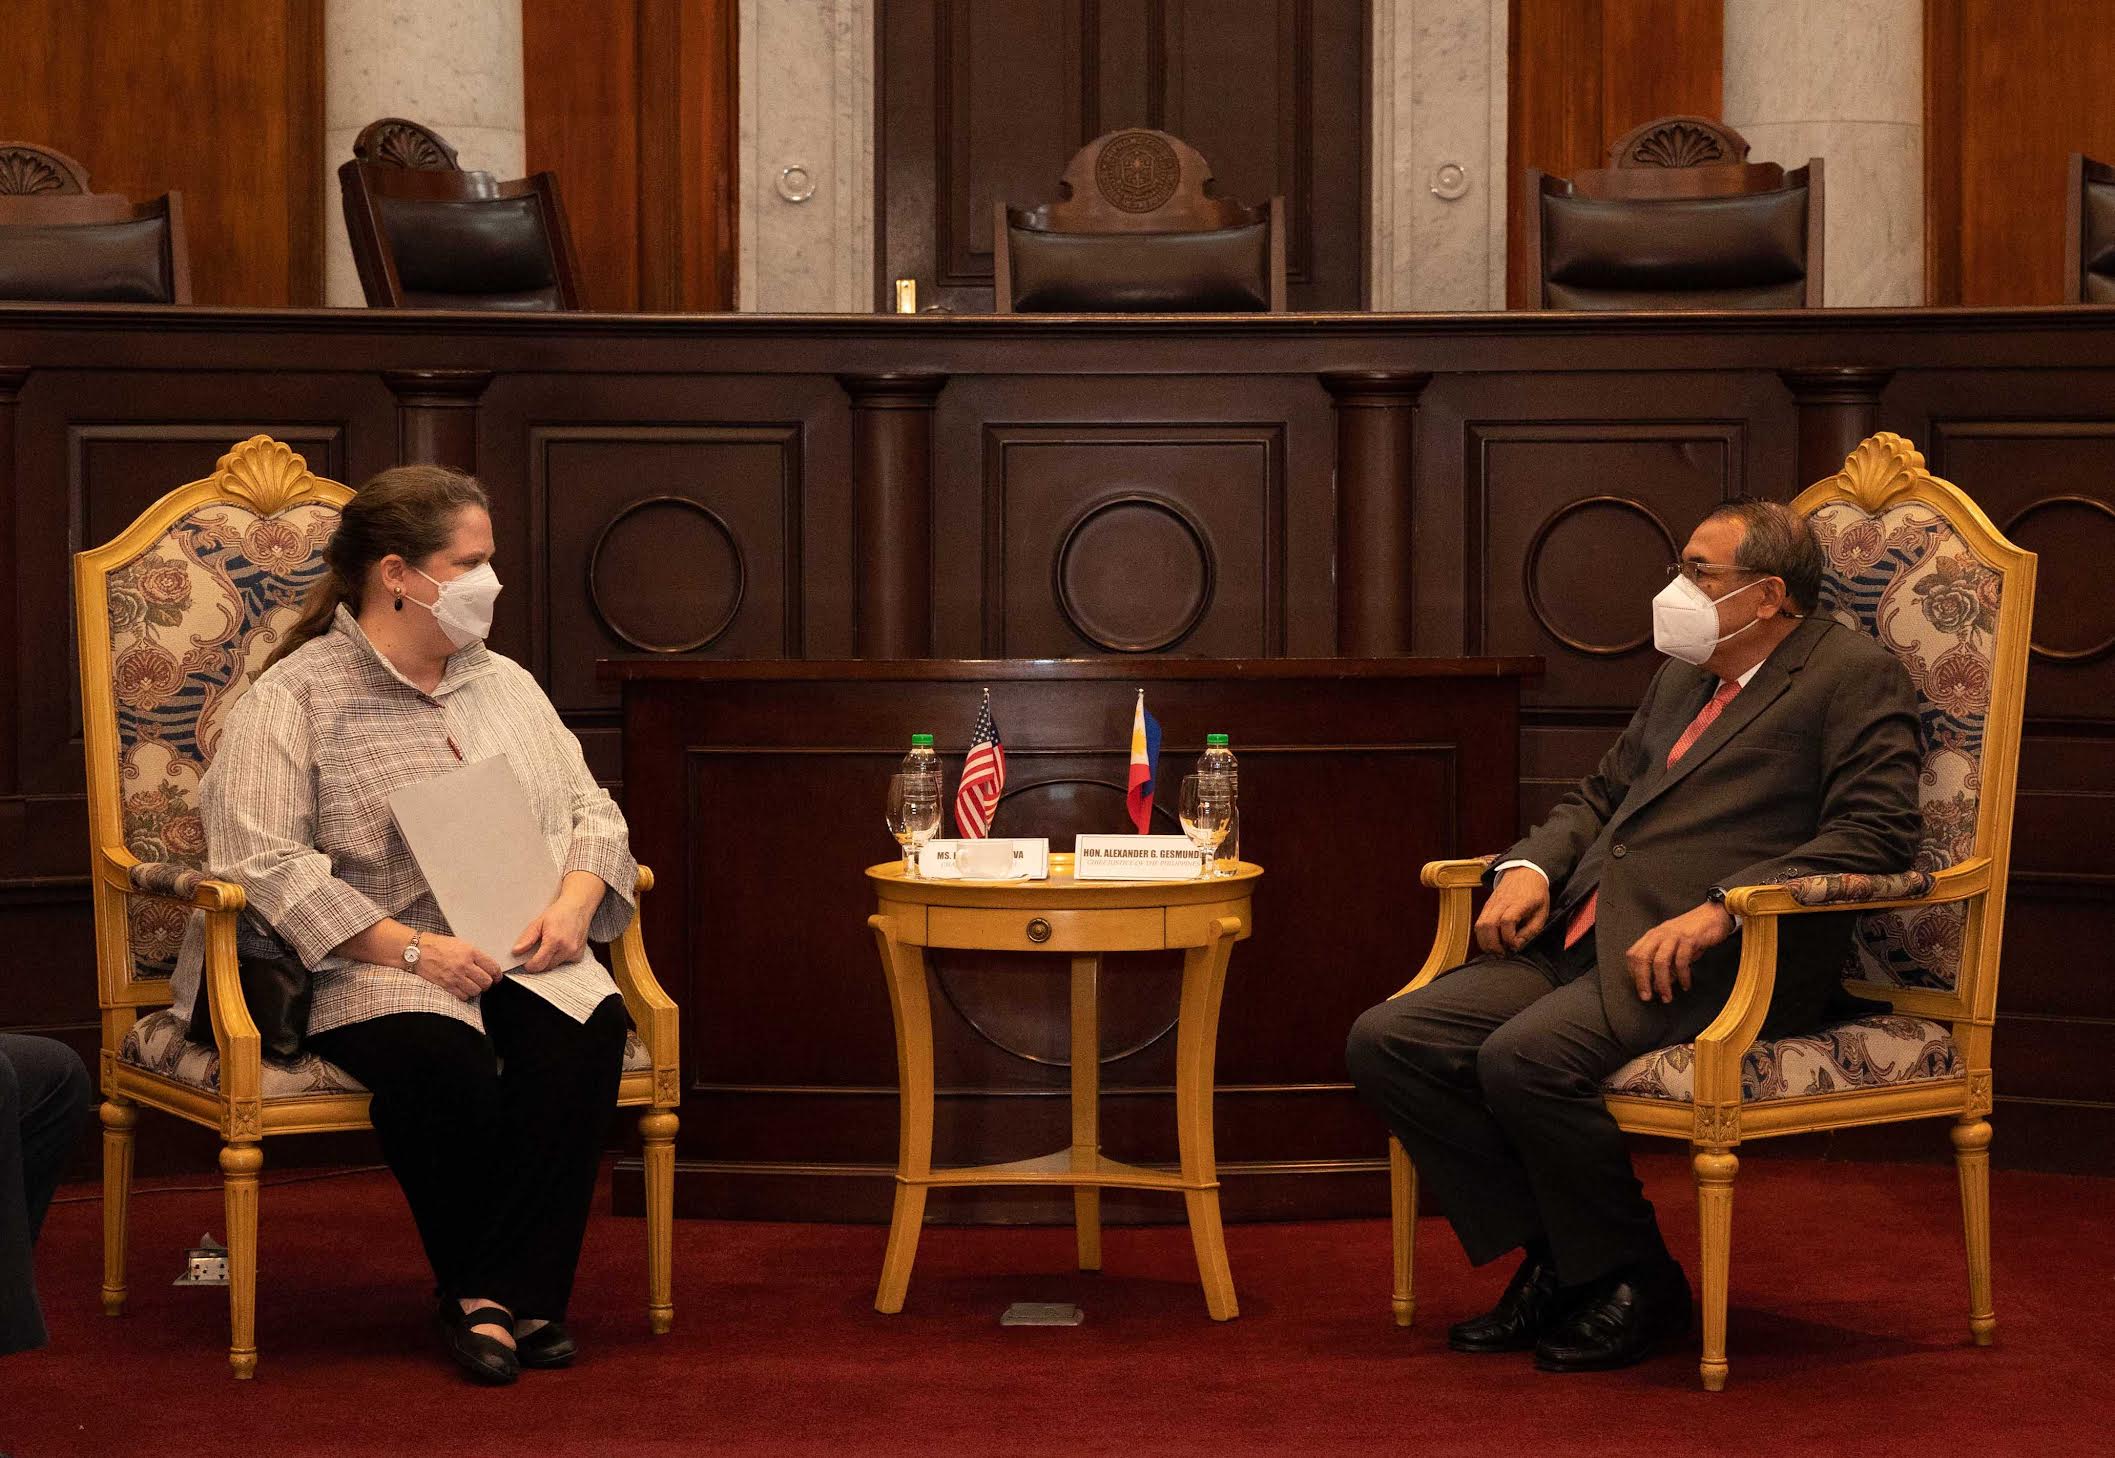 US Embassy in the Philippines Chargé d’Affaires ad interim Heather Variava meets with Supreme Court Chief Justice Alexander Gesmundo to discuss judicial reforms and support efforts to improve access to justice. Photo and caption from the US Embassy in Manila sc videoconferencing